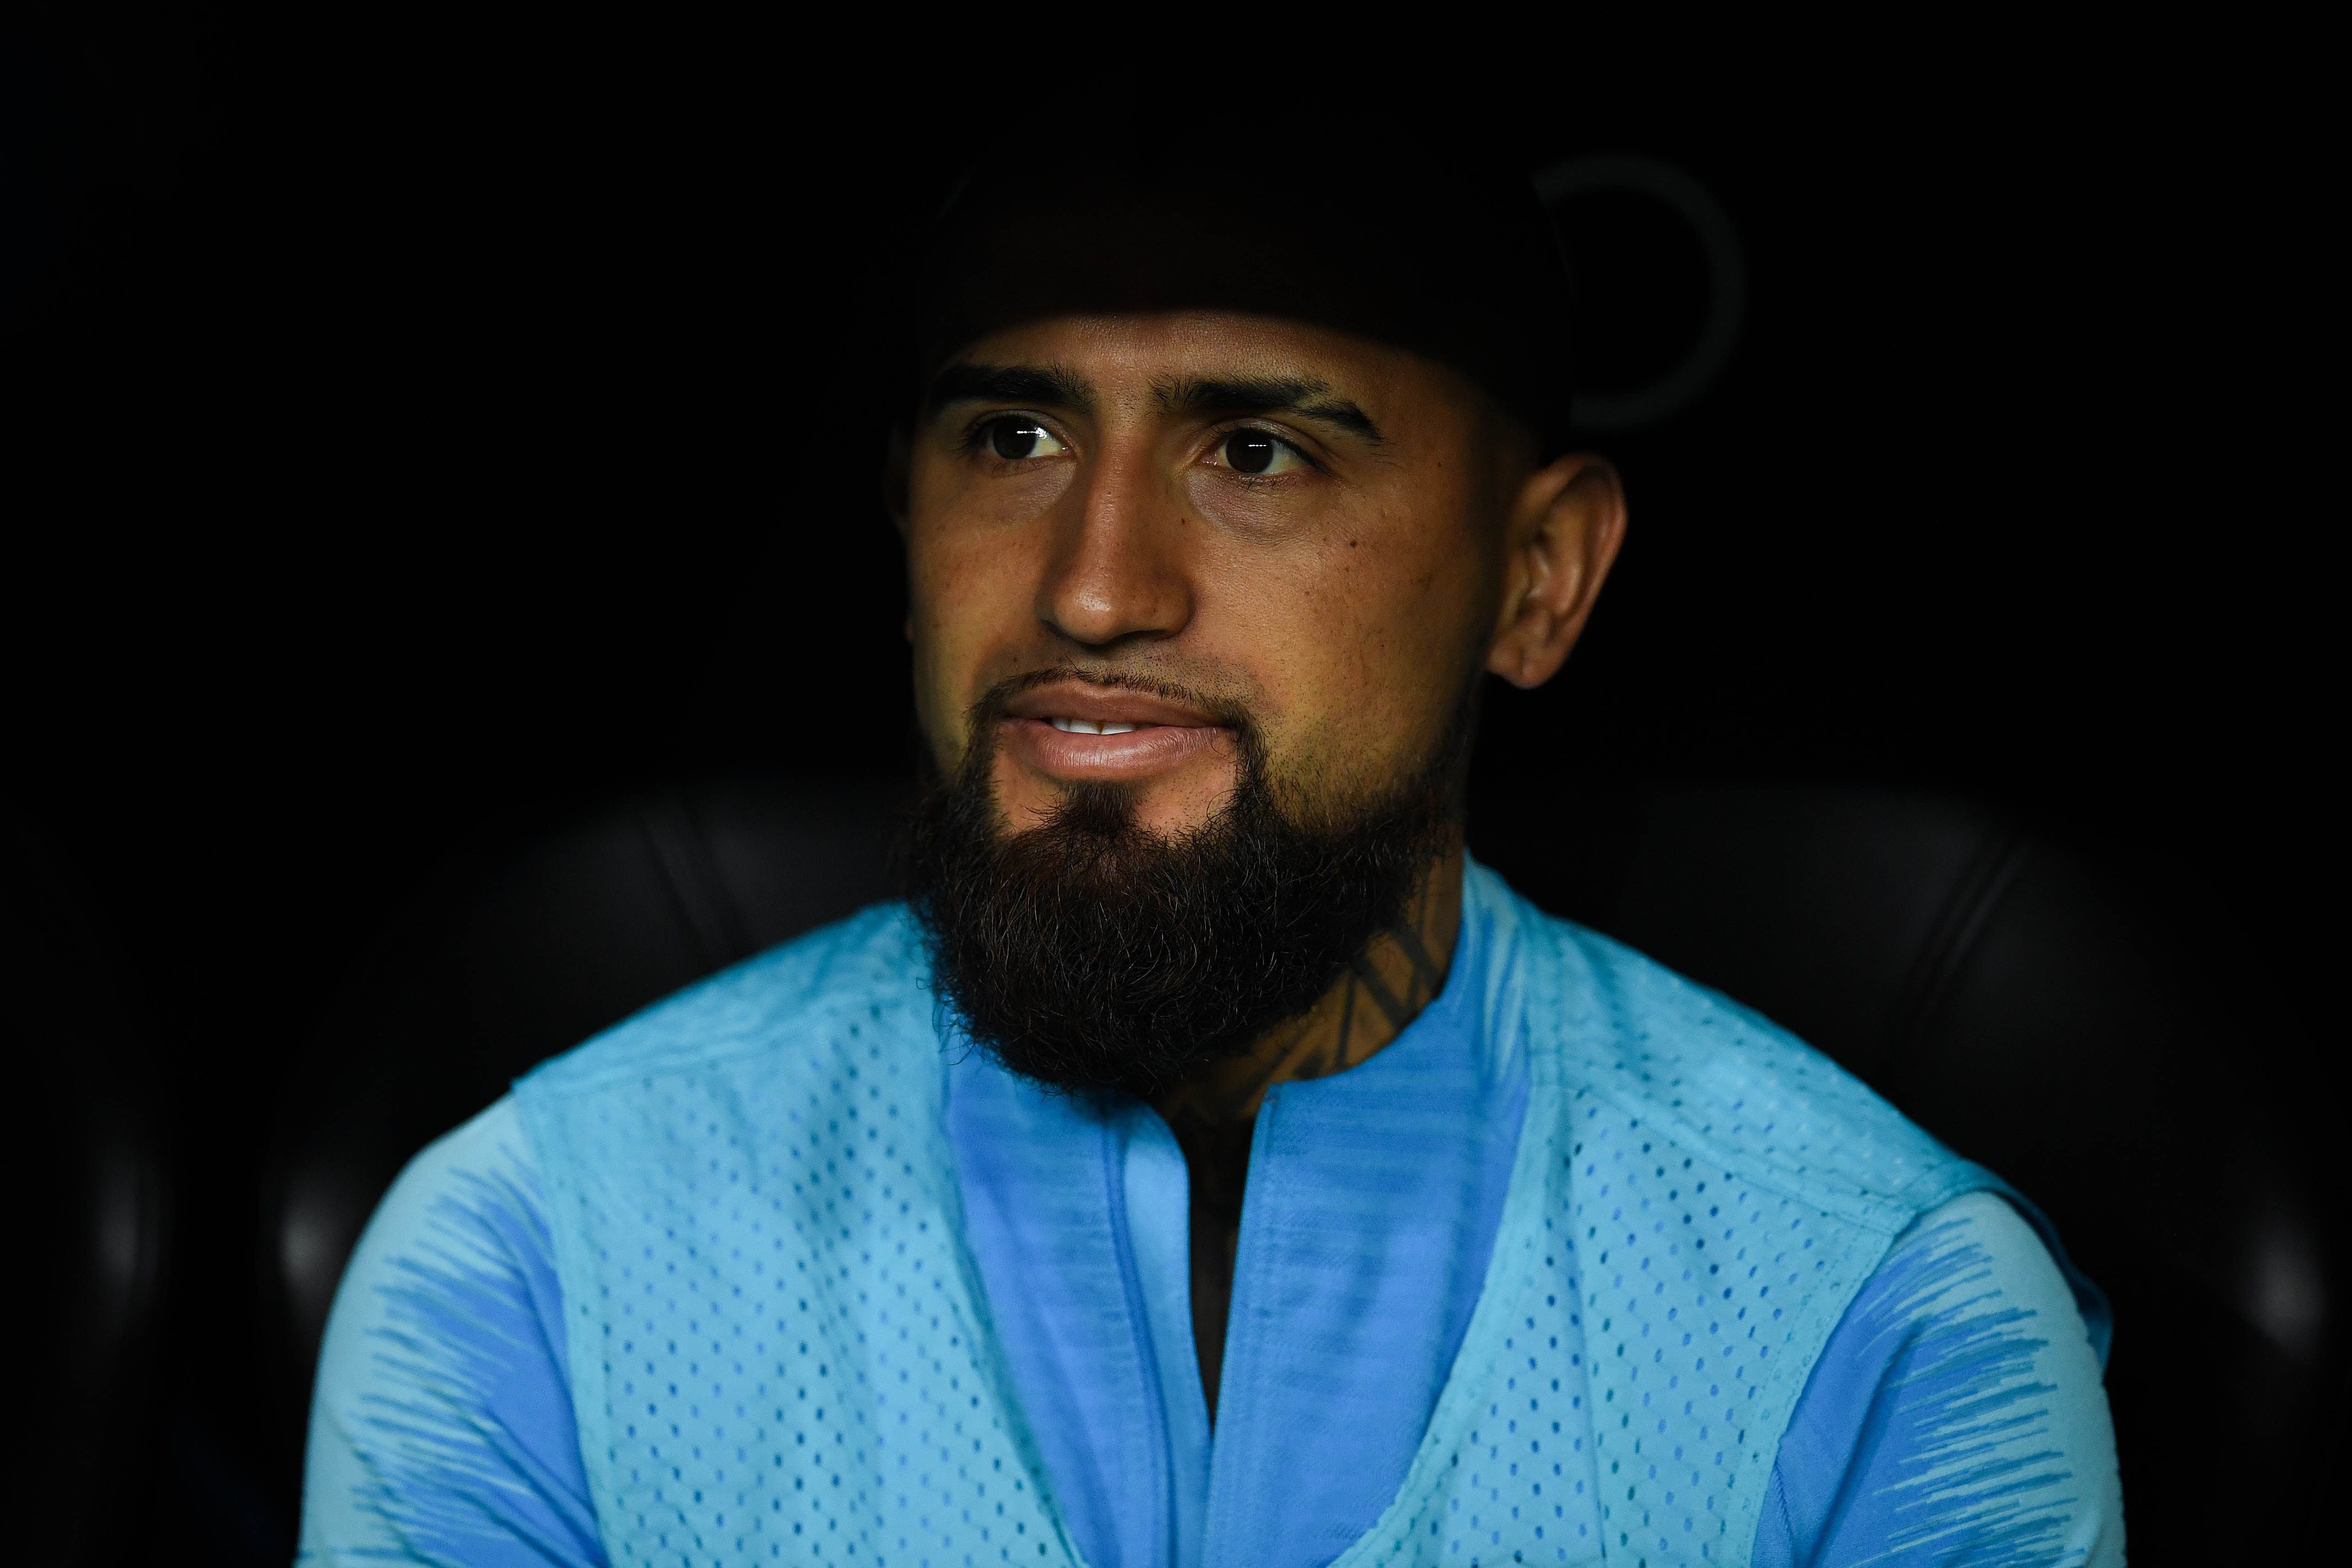 MADRID, SPAIN - MARCH 02: Arturo Vidal of FC Barcelona looks on during the La Liga match between Real Madrid CF and FC Barcelona at Estadio Santiago Bernabeu on March 02, 2019 in Madrid, Spain. (Photo by David Ramos/Getty Images)